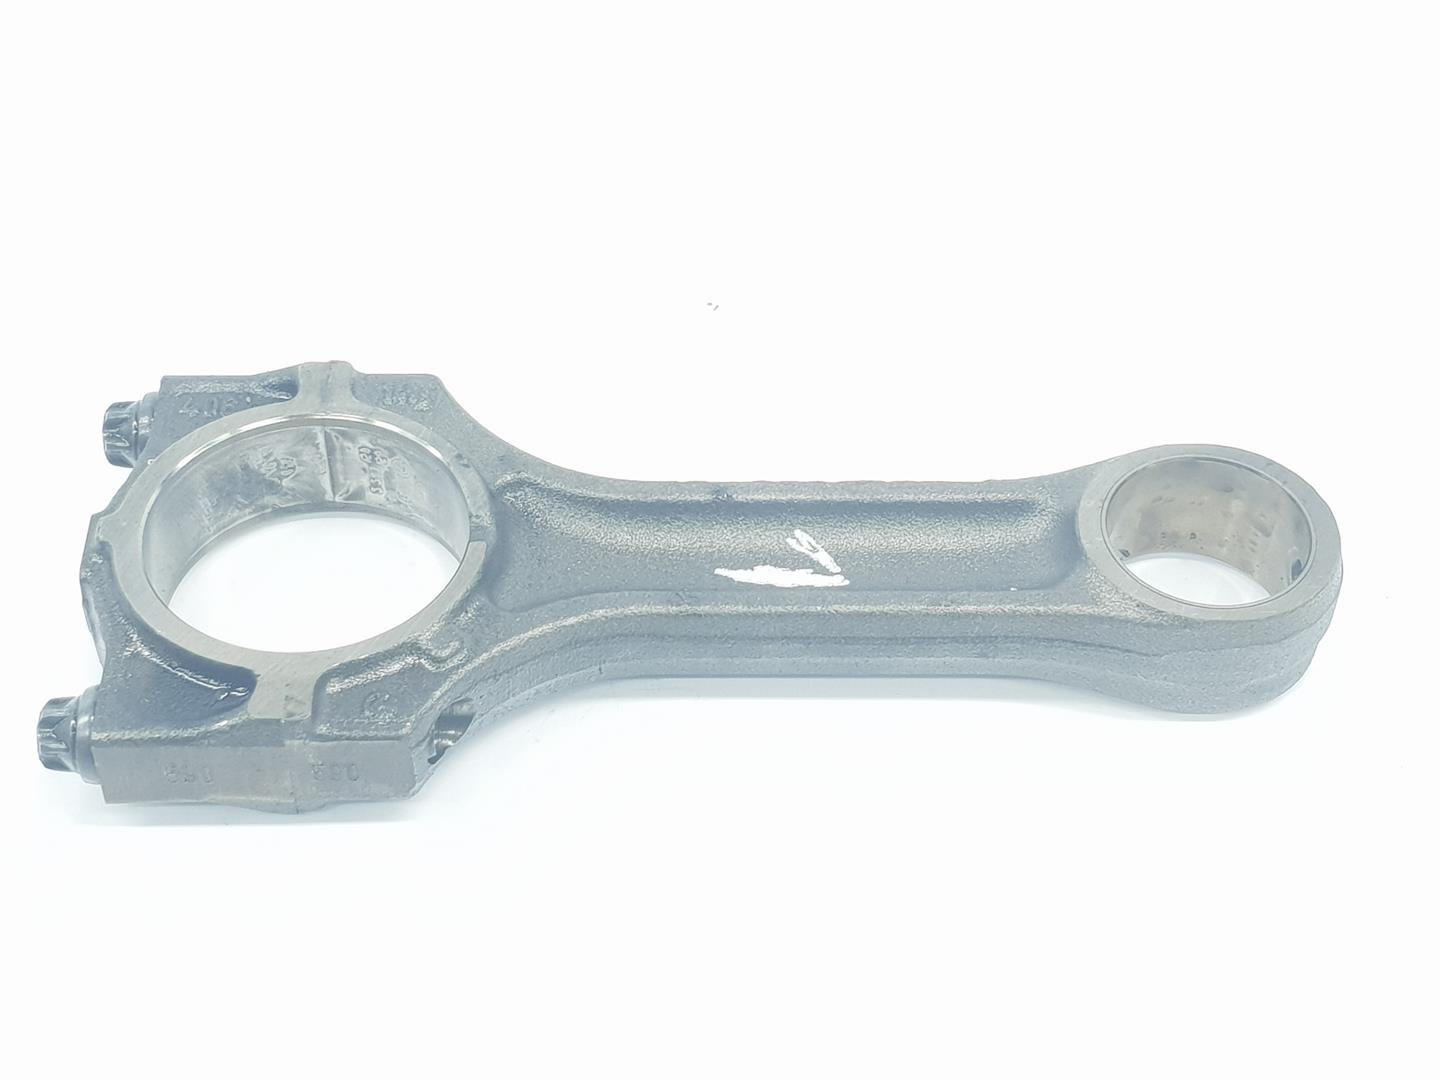 BMW 3 Series E46 (1997-2006) Connecting Rod 11247805253, 11247805253, 1111AA 24233035